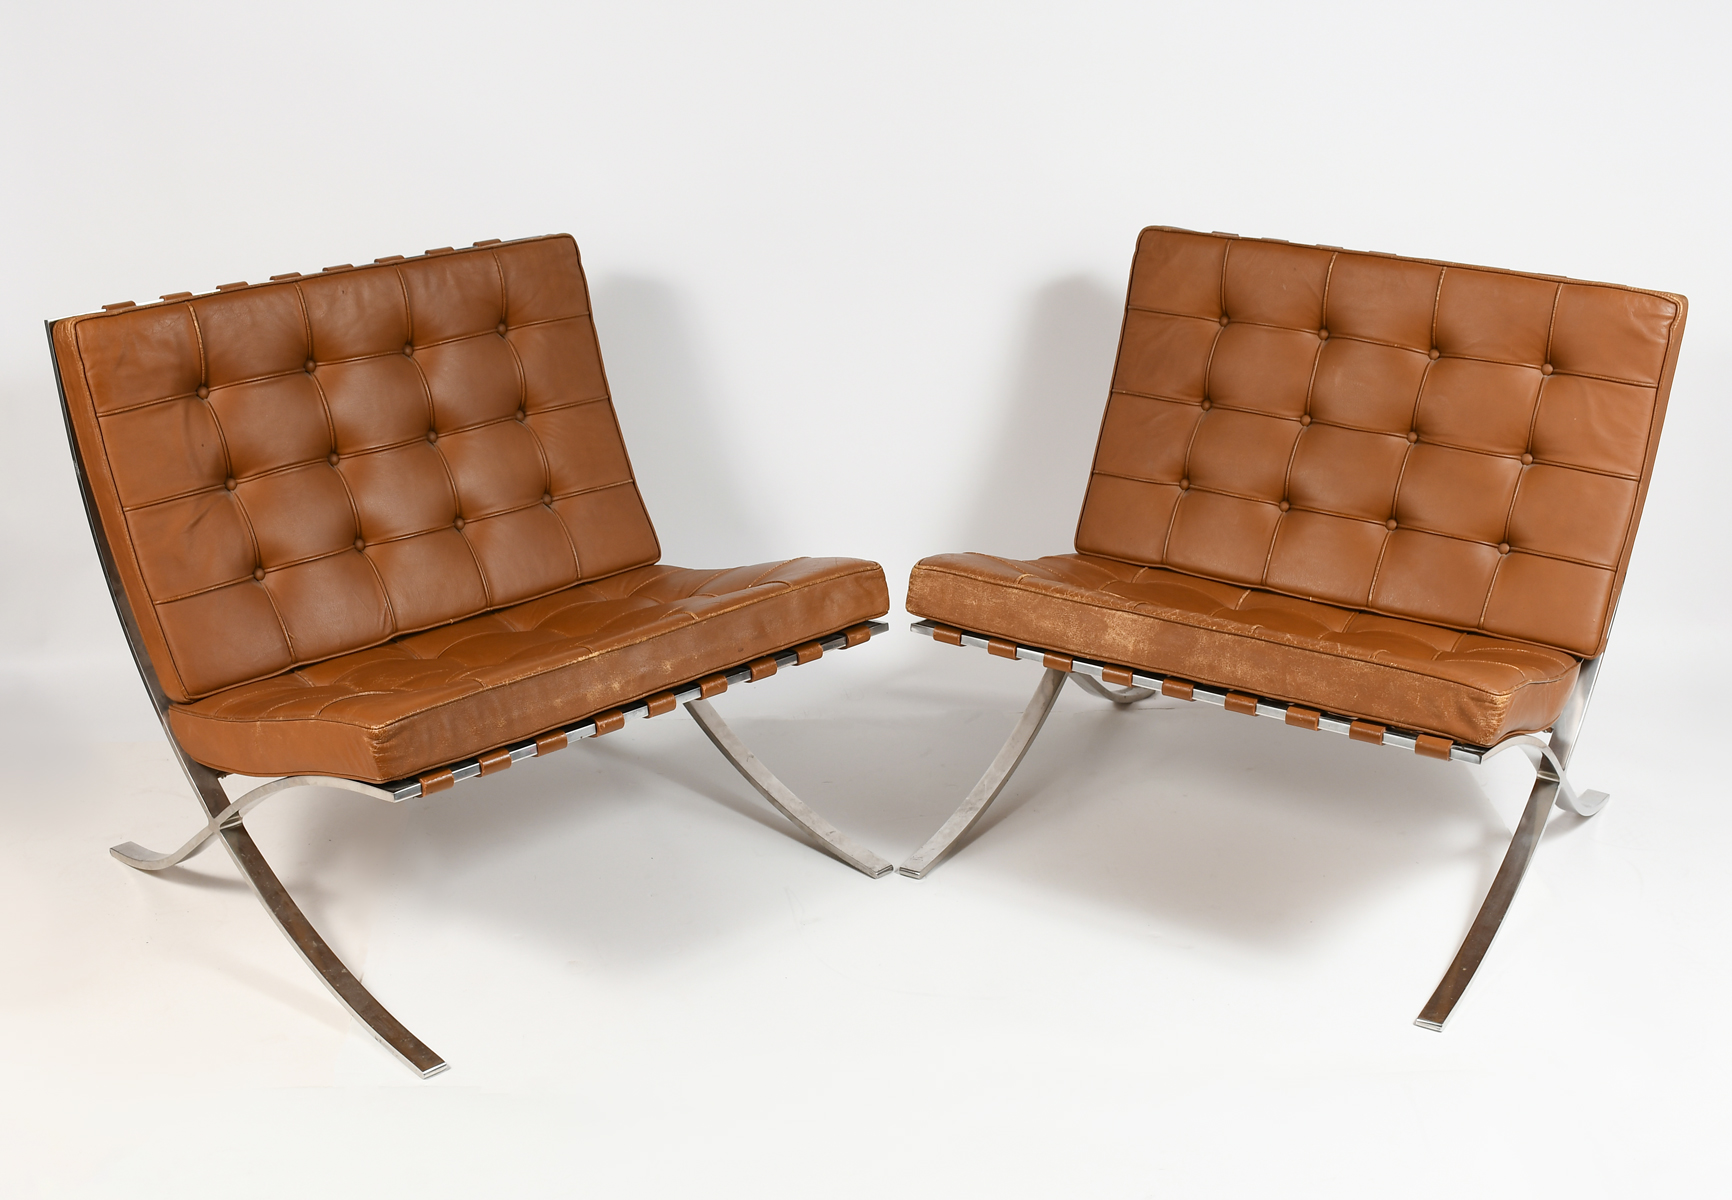 PAIR KNOLL BARCELONA LOUNGE CHAIRS  36a6c9